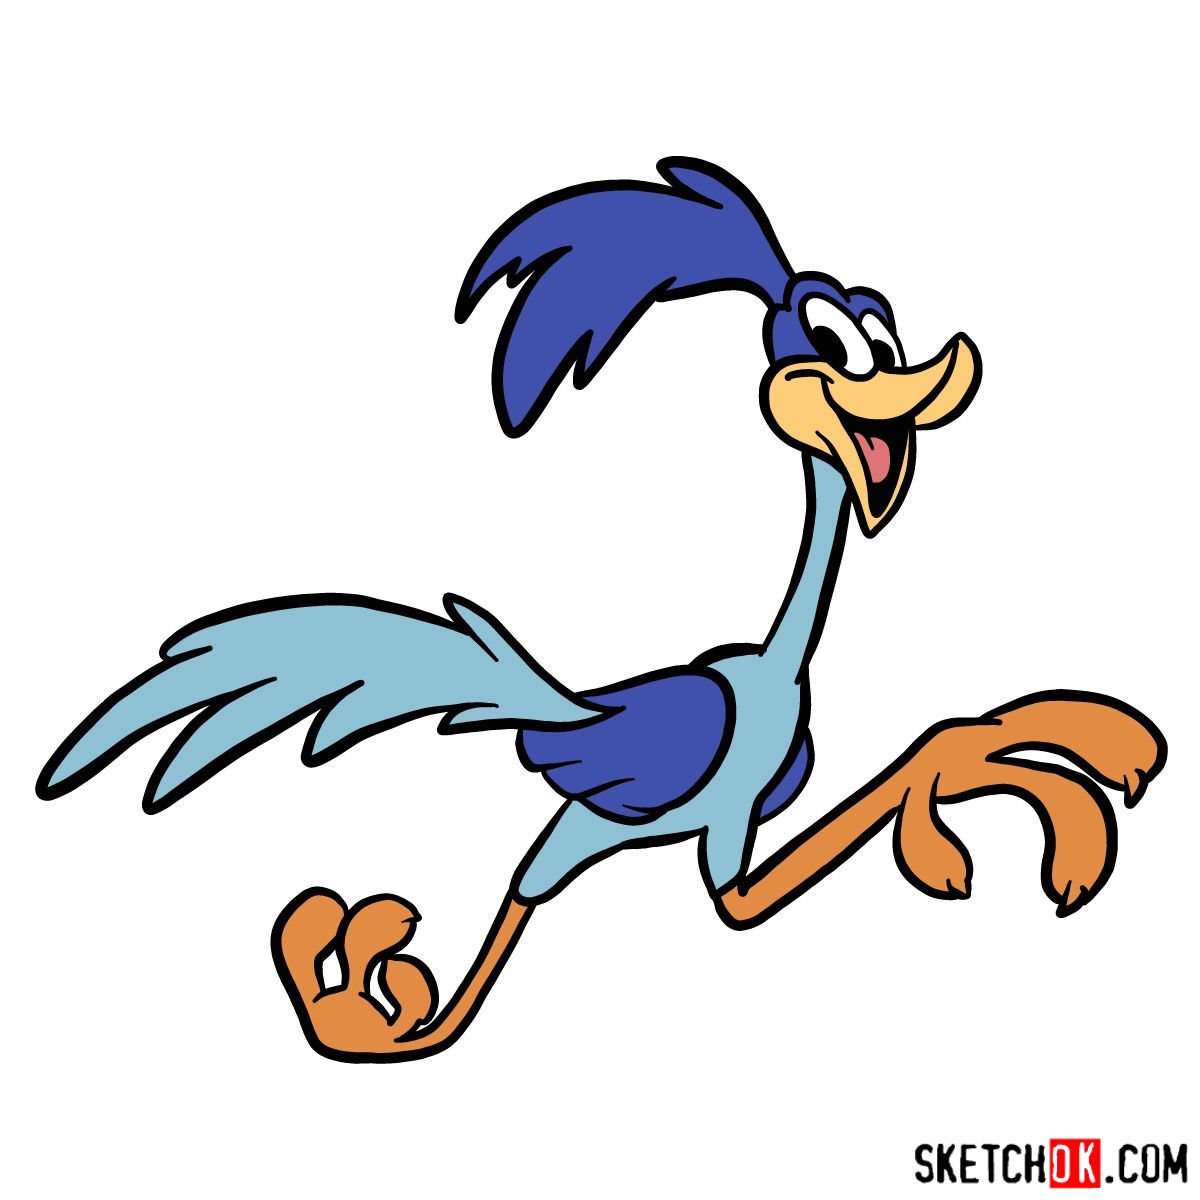 How to draw Road Runner - Sketchok easy drawing guides